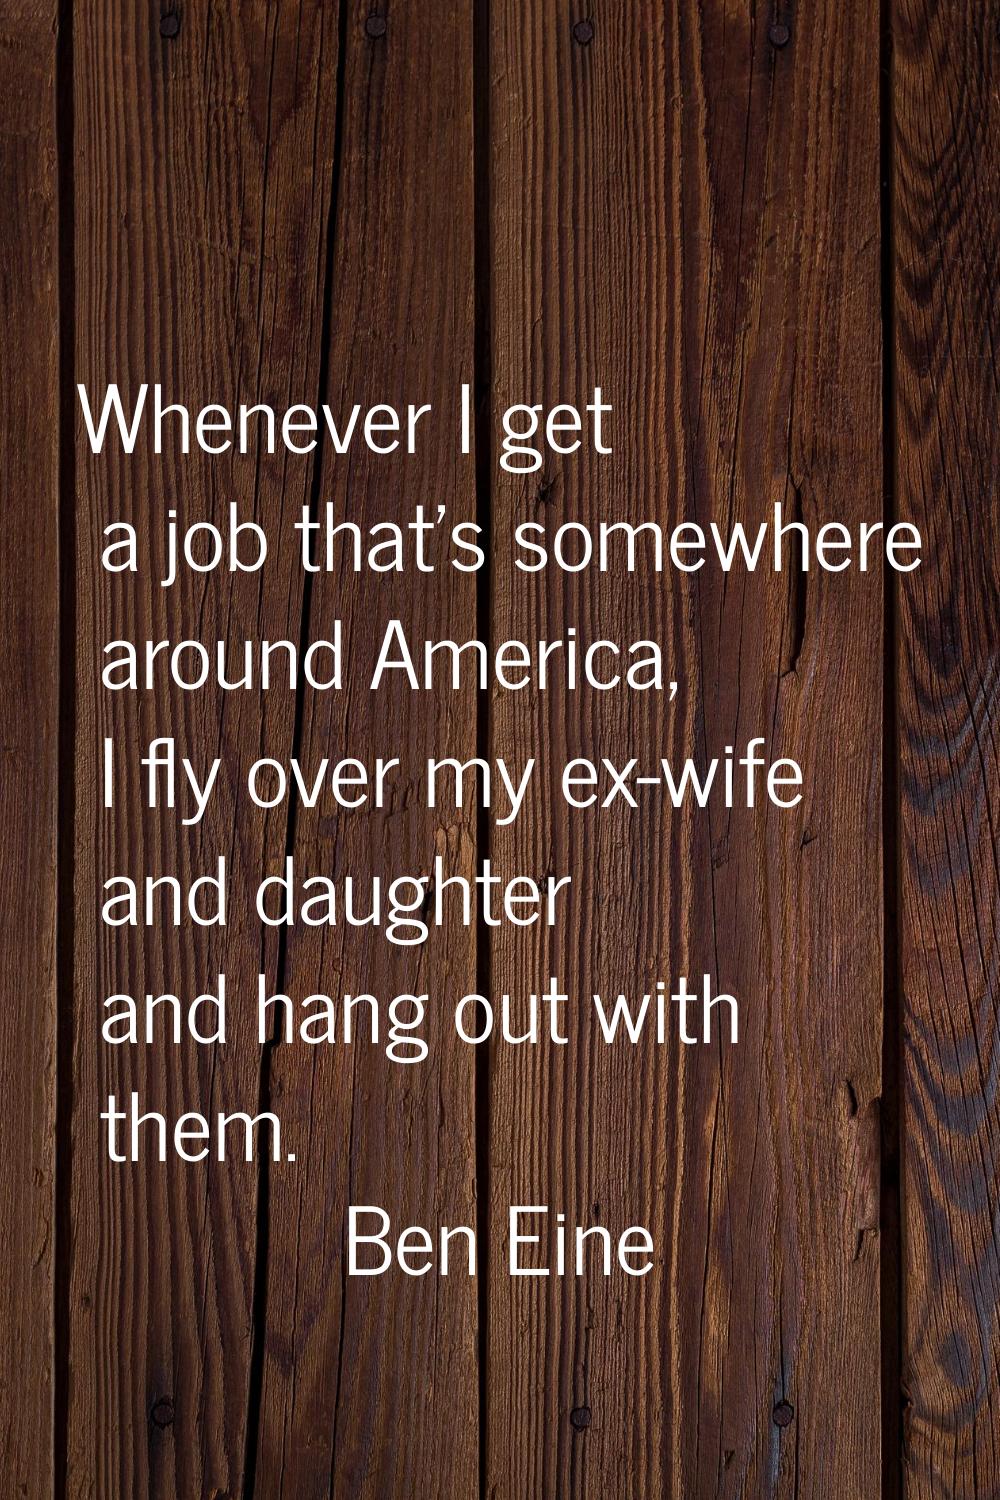 Whenever I get a job that's somewhere around America, I fly over my ex-wife and daughter and hang o